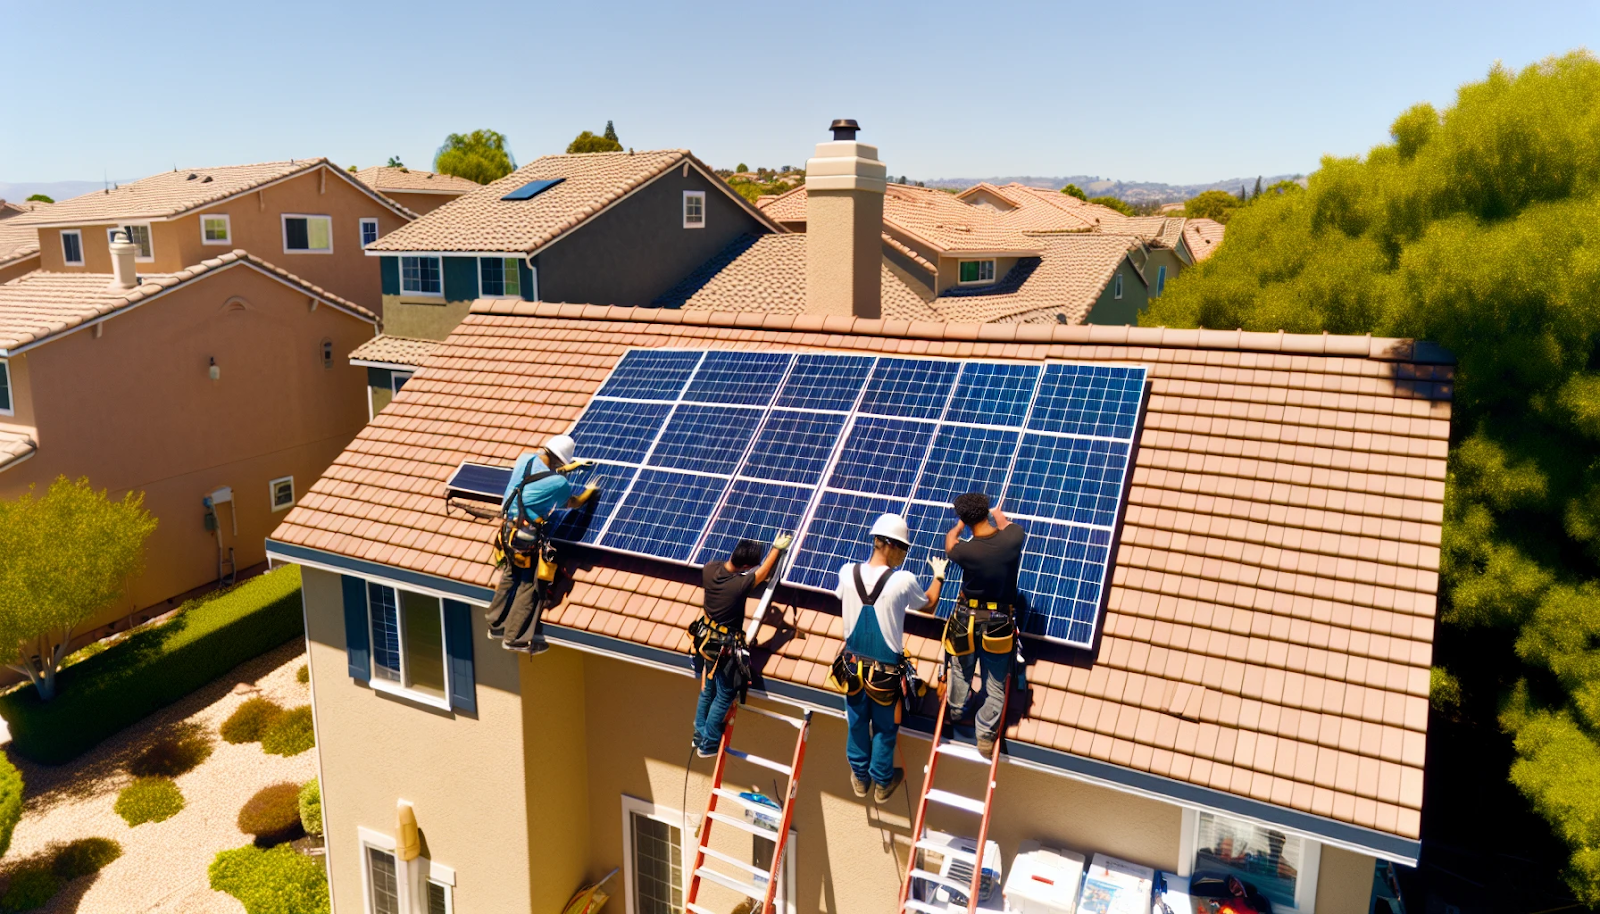 Solar panels installation on a residential rooftop